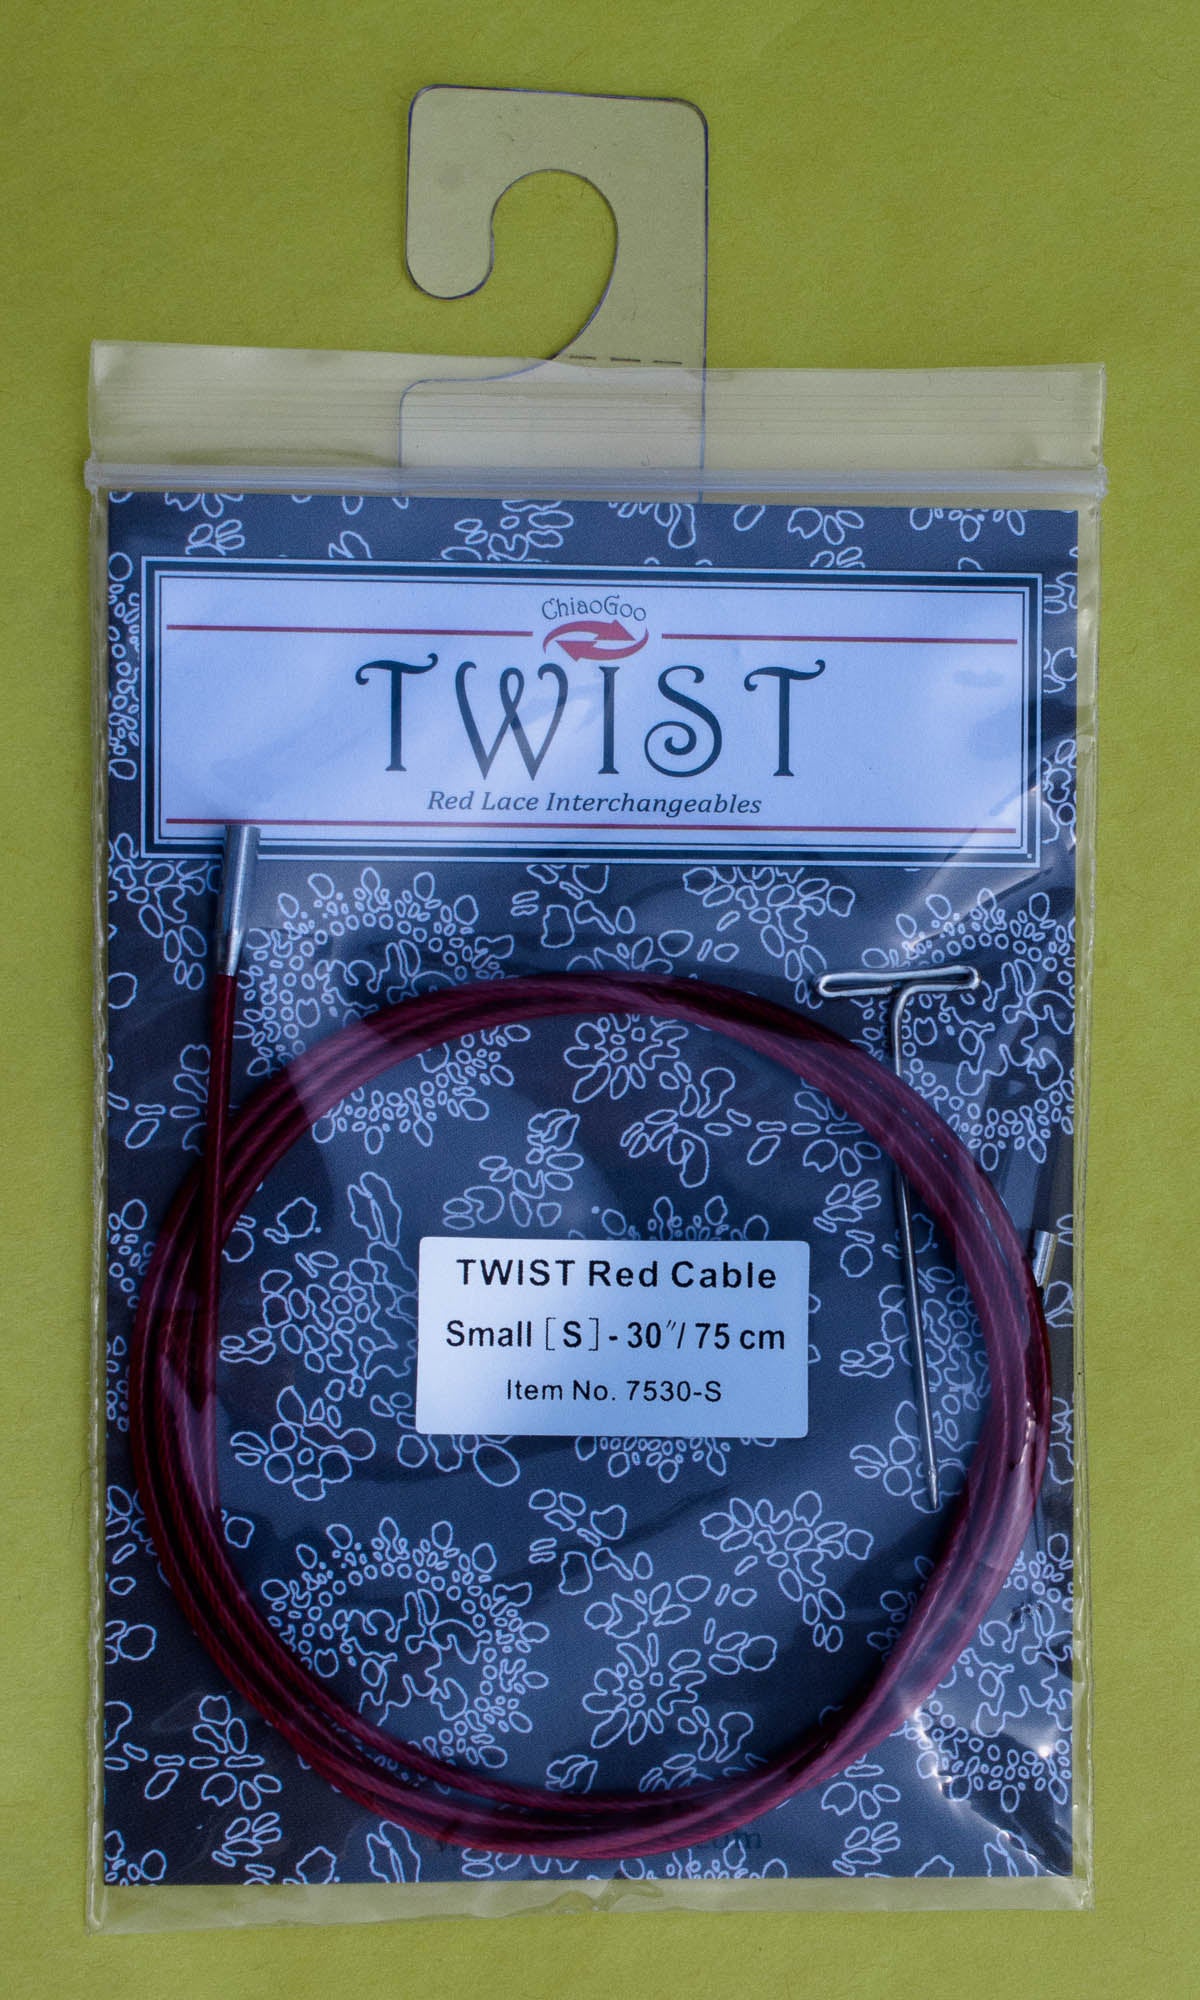 ChiaoGoo Twist Red Lace Interchangeable Cables 30 inch-Mini